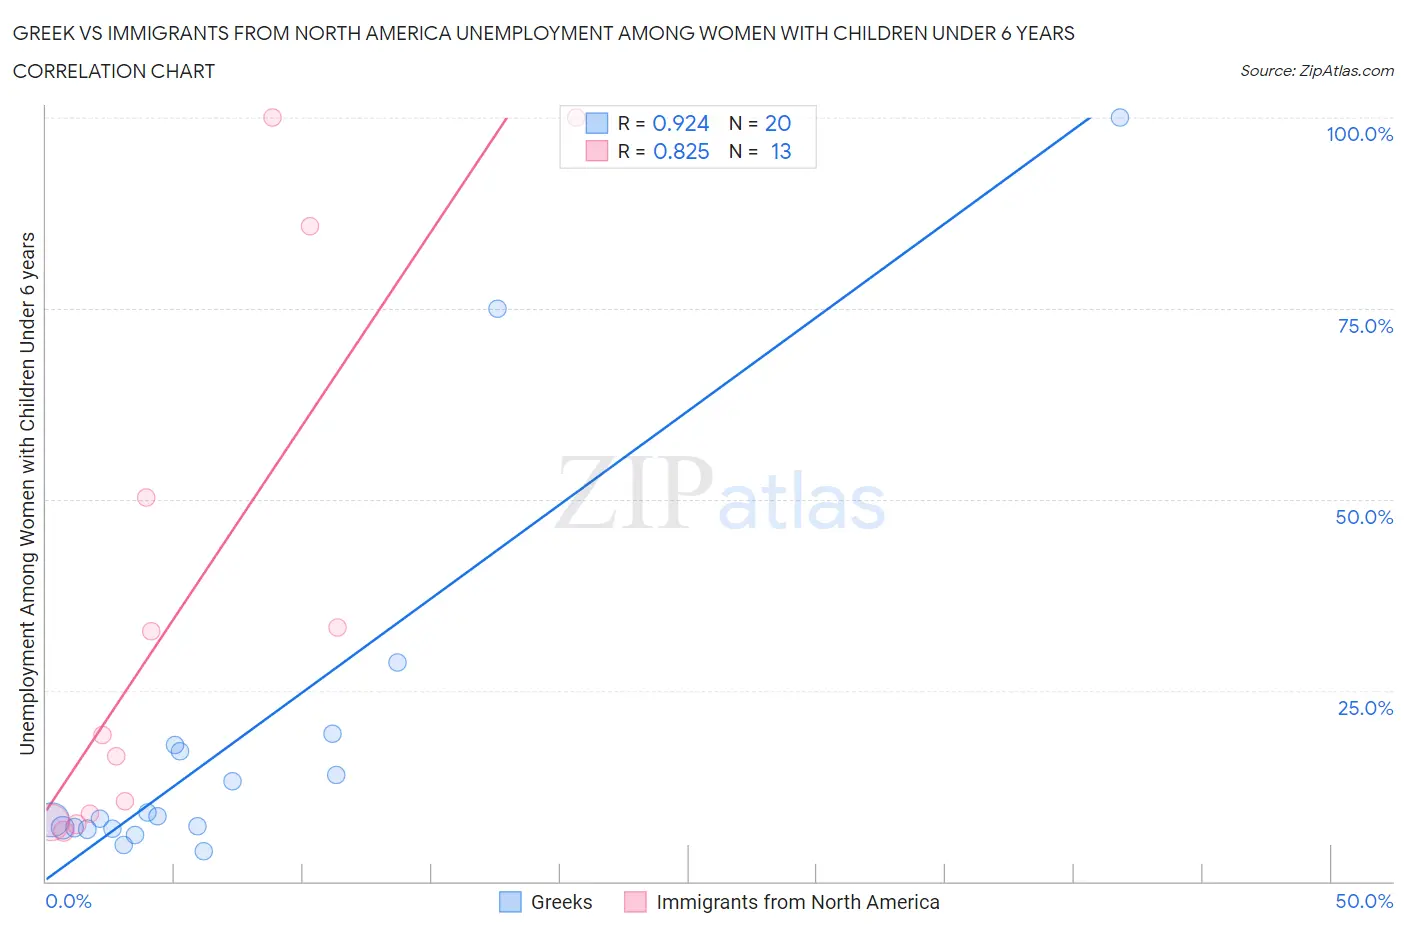 Greek vs Immigrants from North America Unemployment Among Women with Children Under 6 years